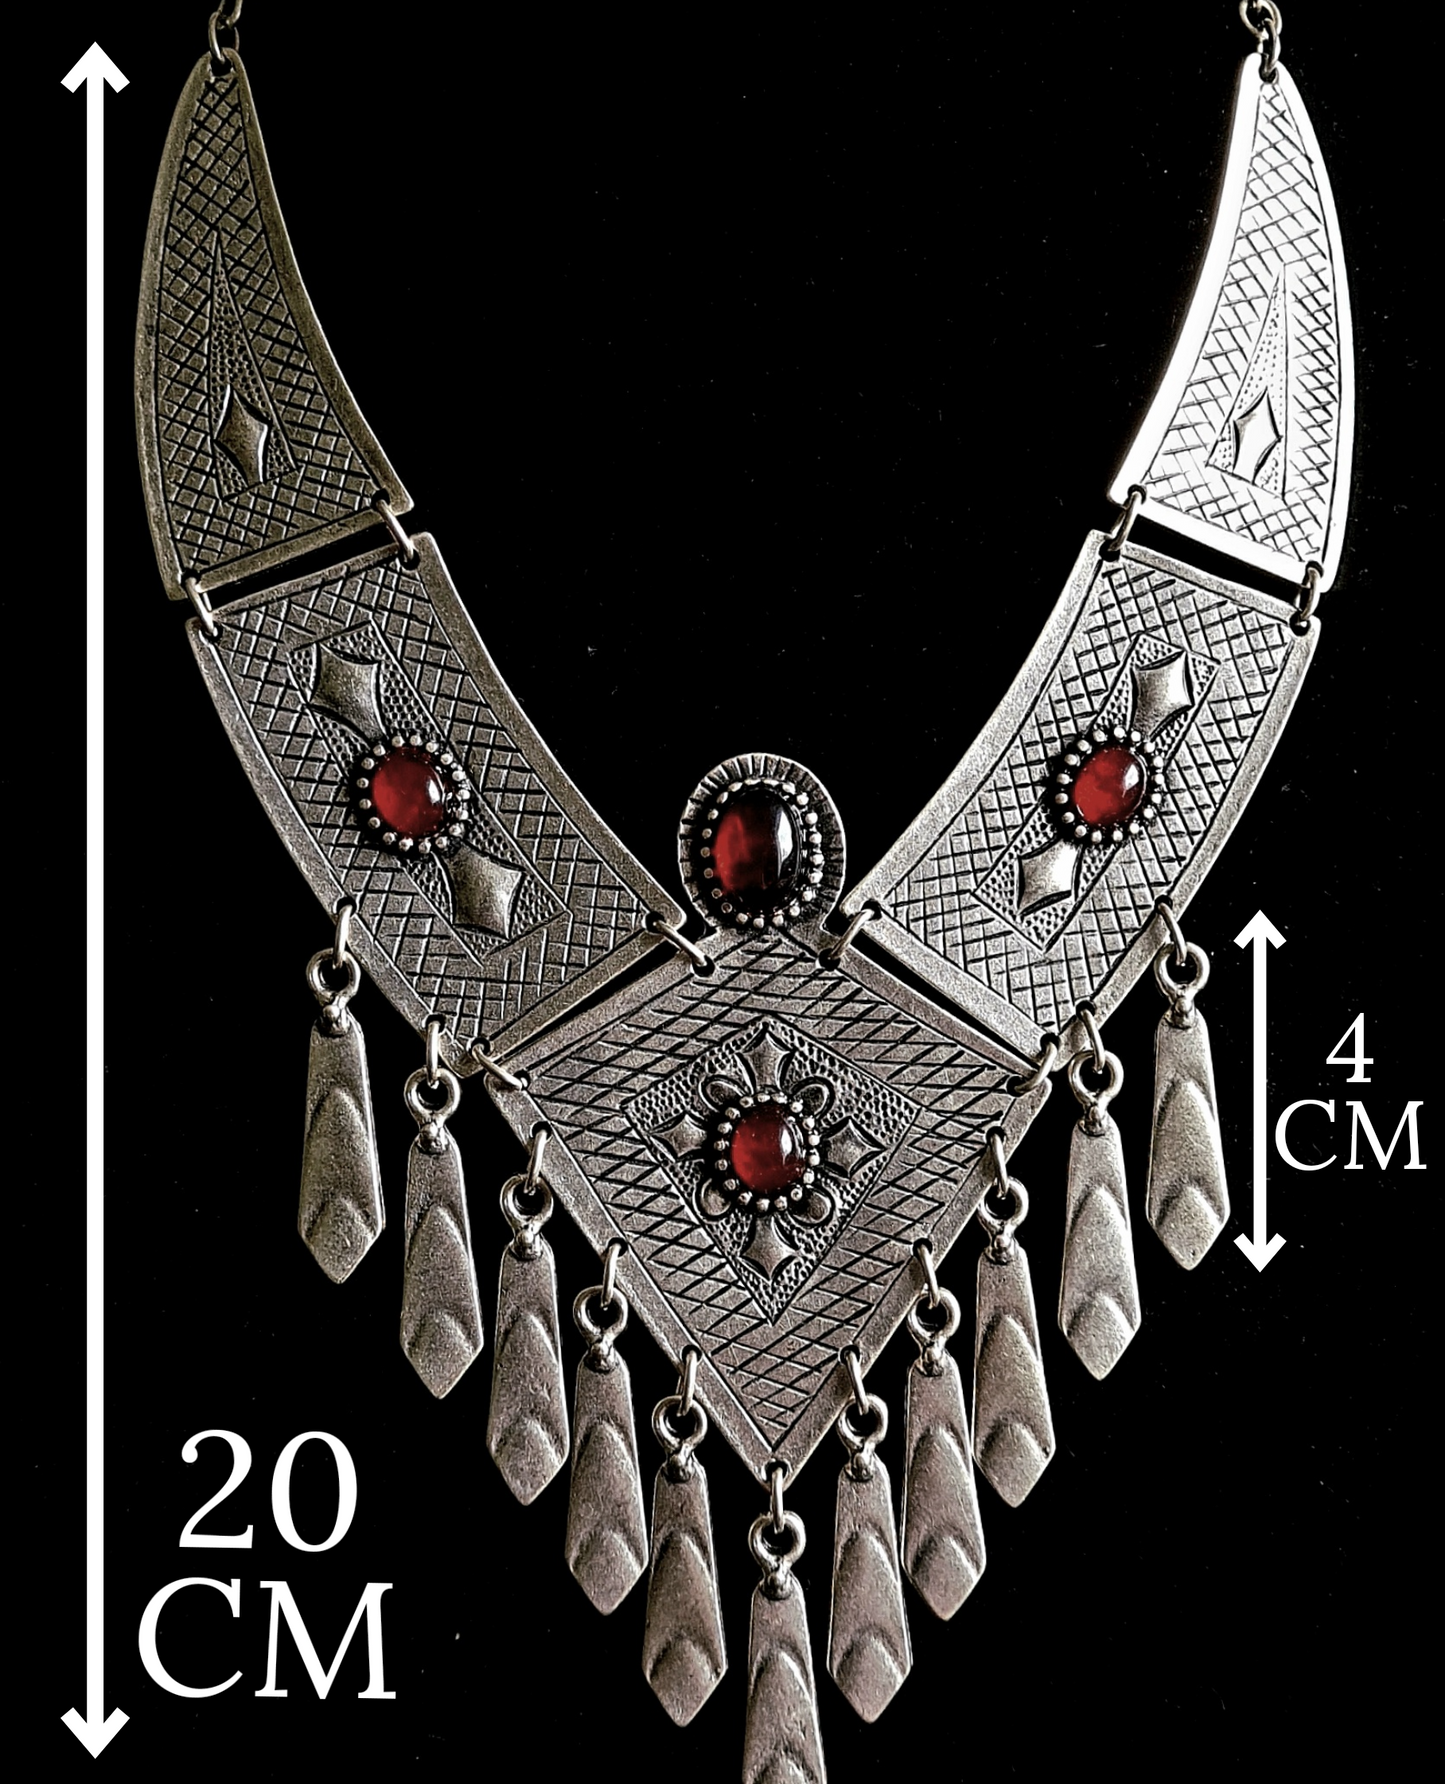 A silver necklace with red stones on a black background. The necklace is made of silver and has a delicate design. The red stones are round and have a deep red color. The necklace is long and hangs down to the chest. with measurements.